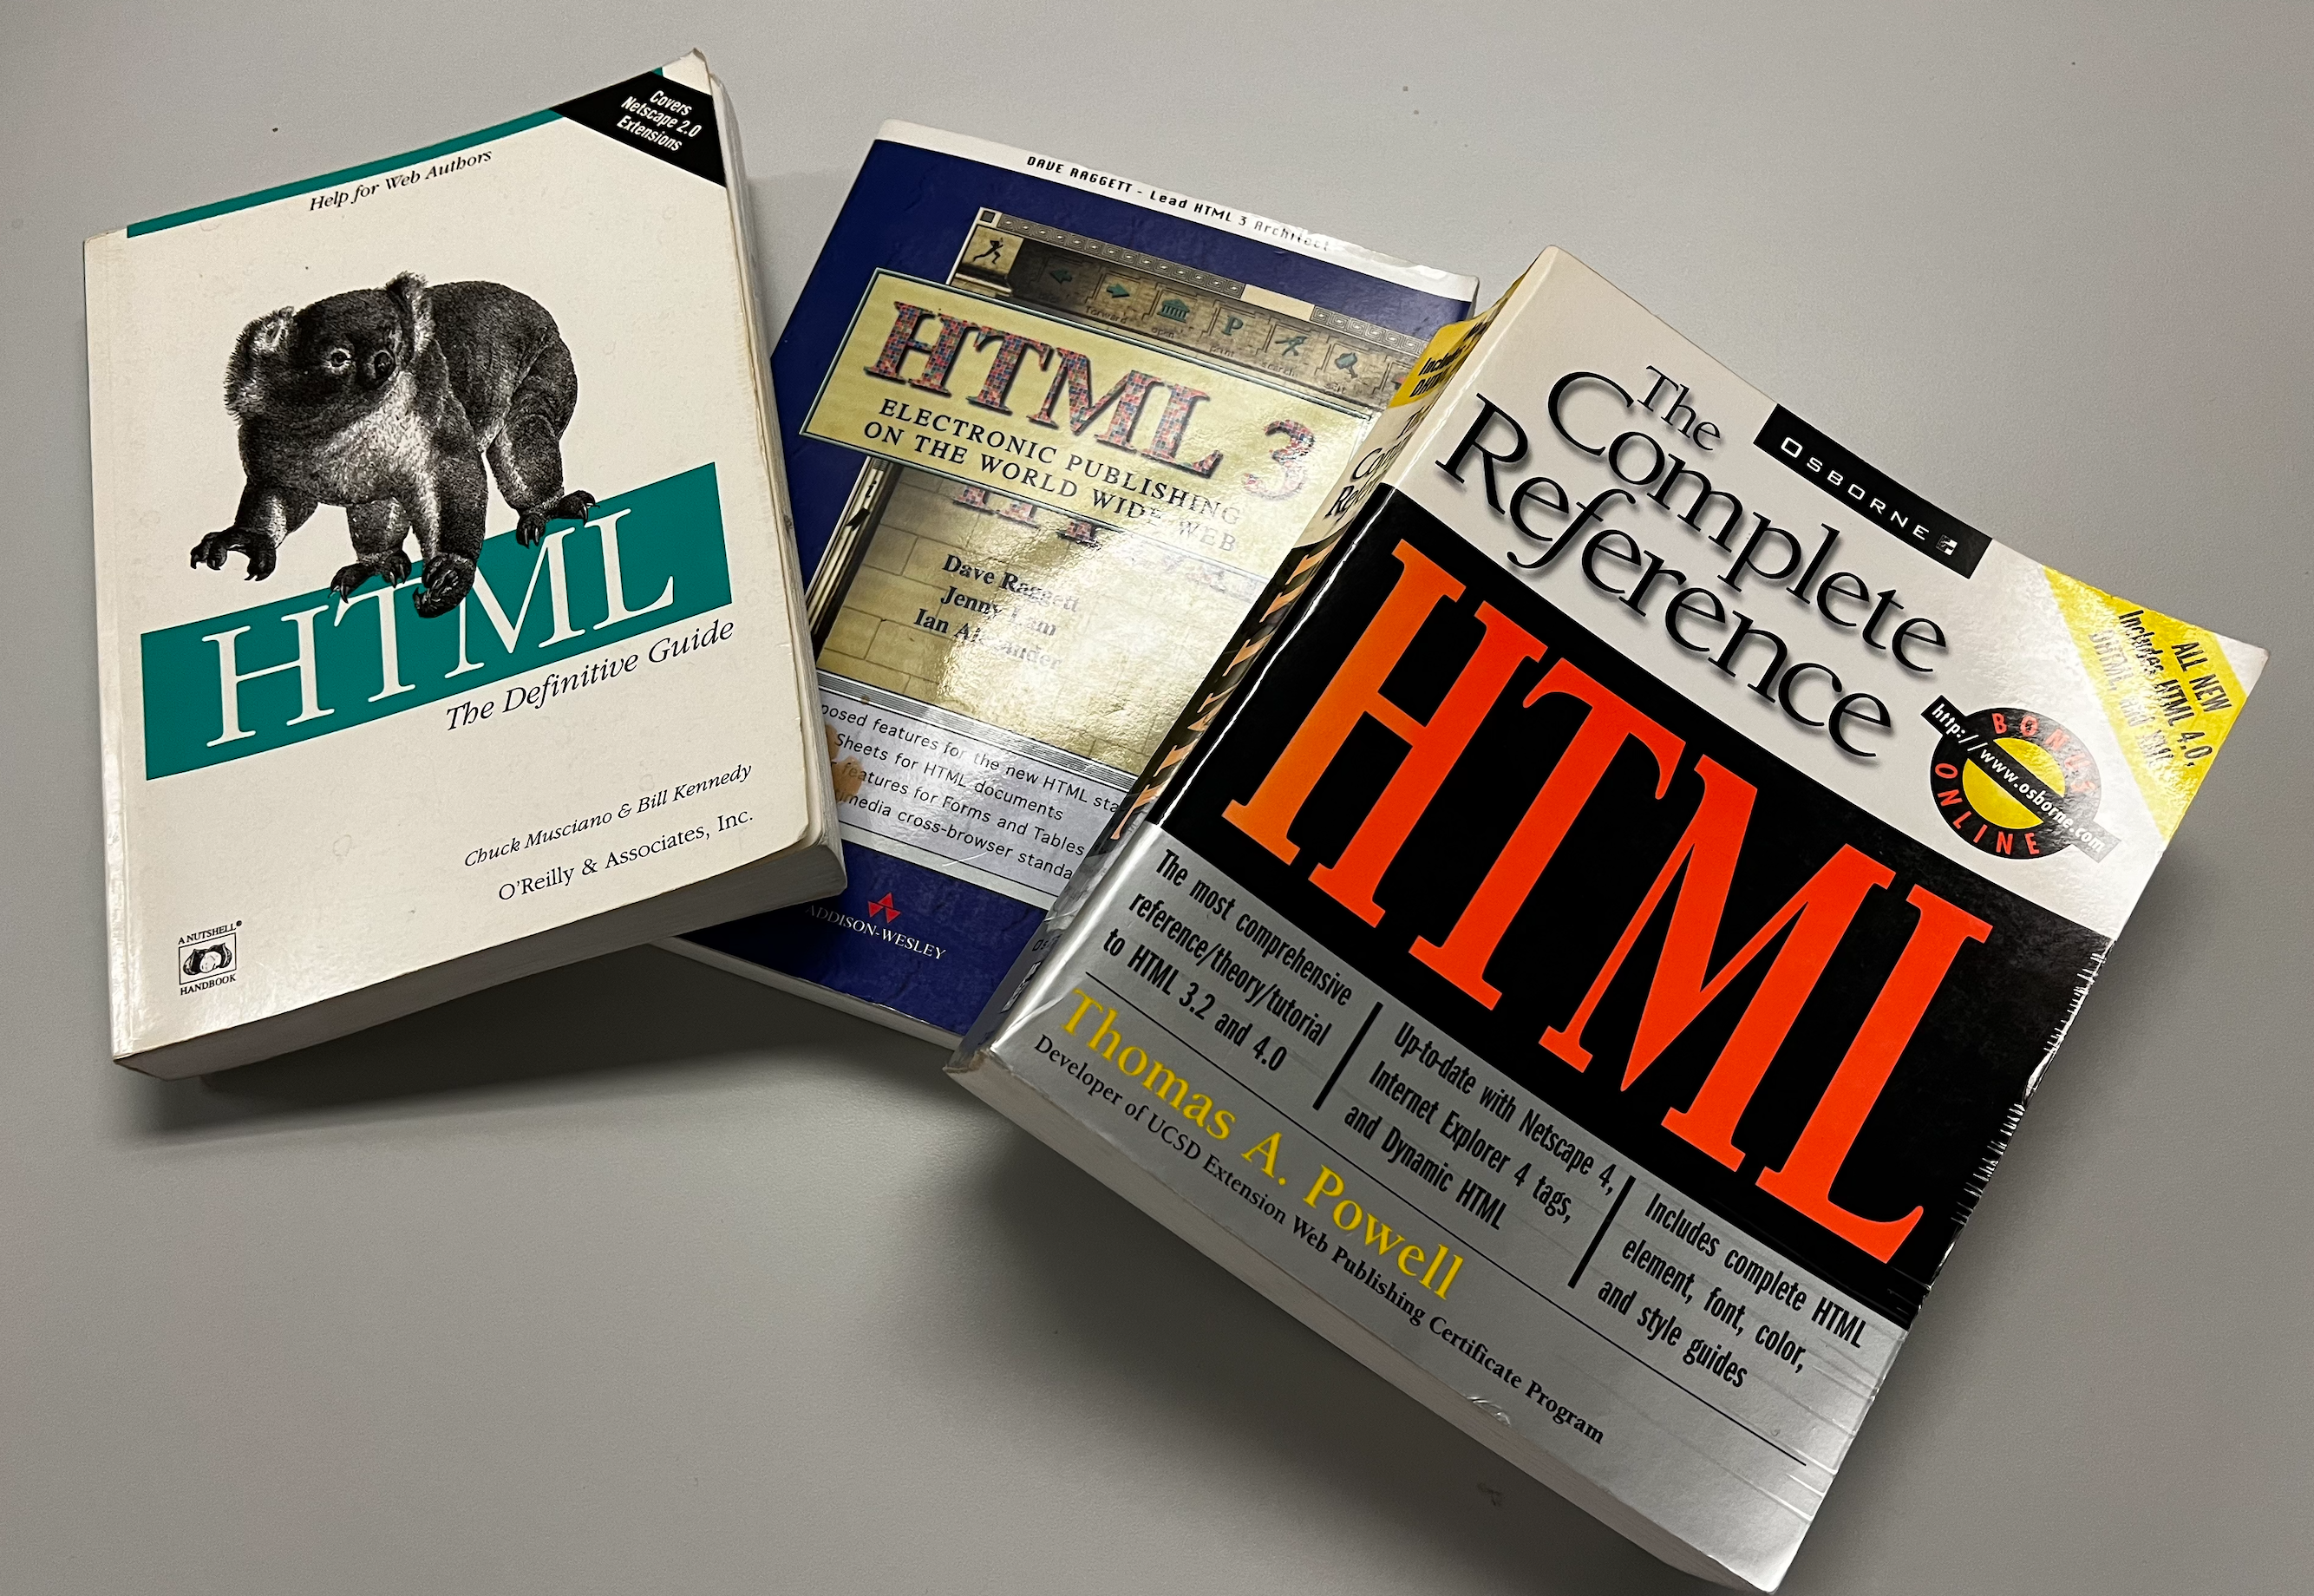 Three old books about HTML